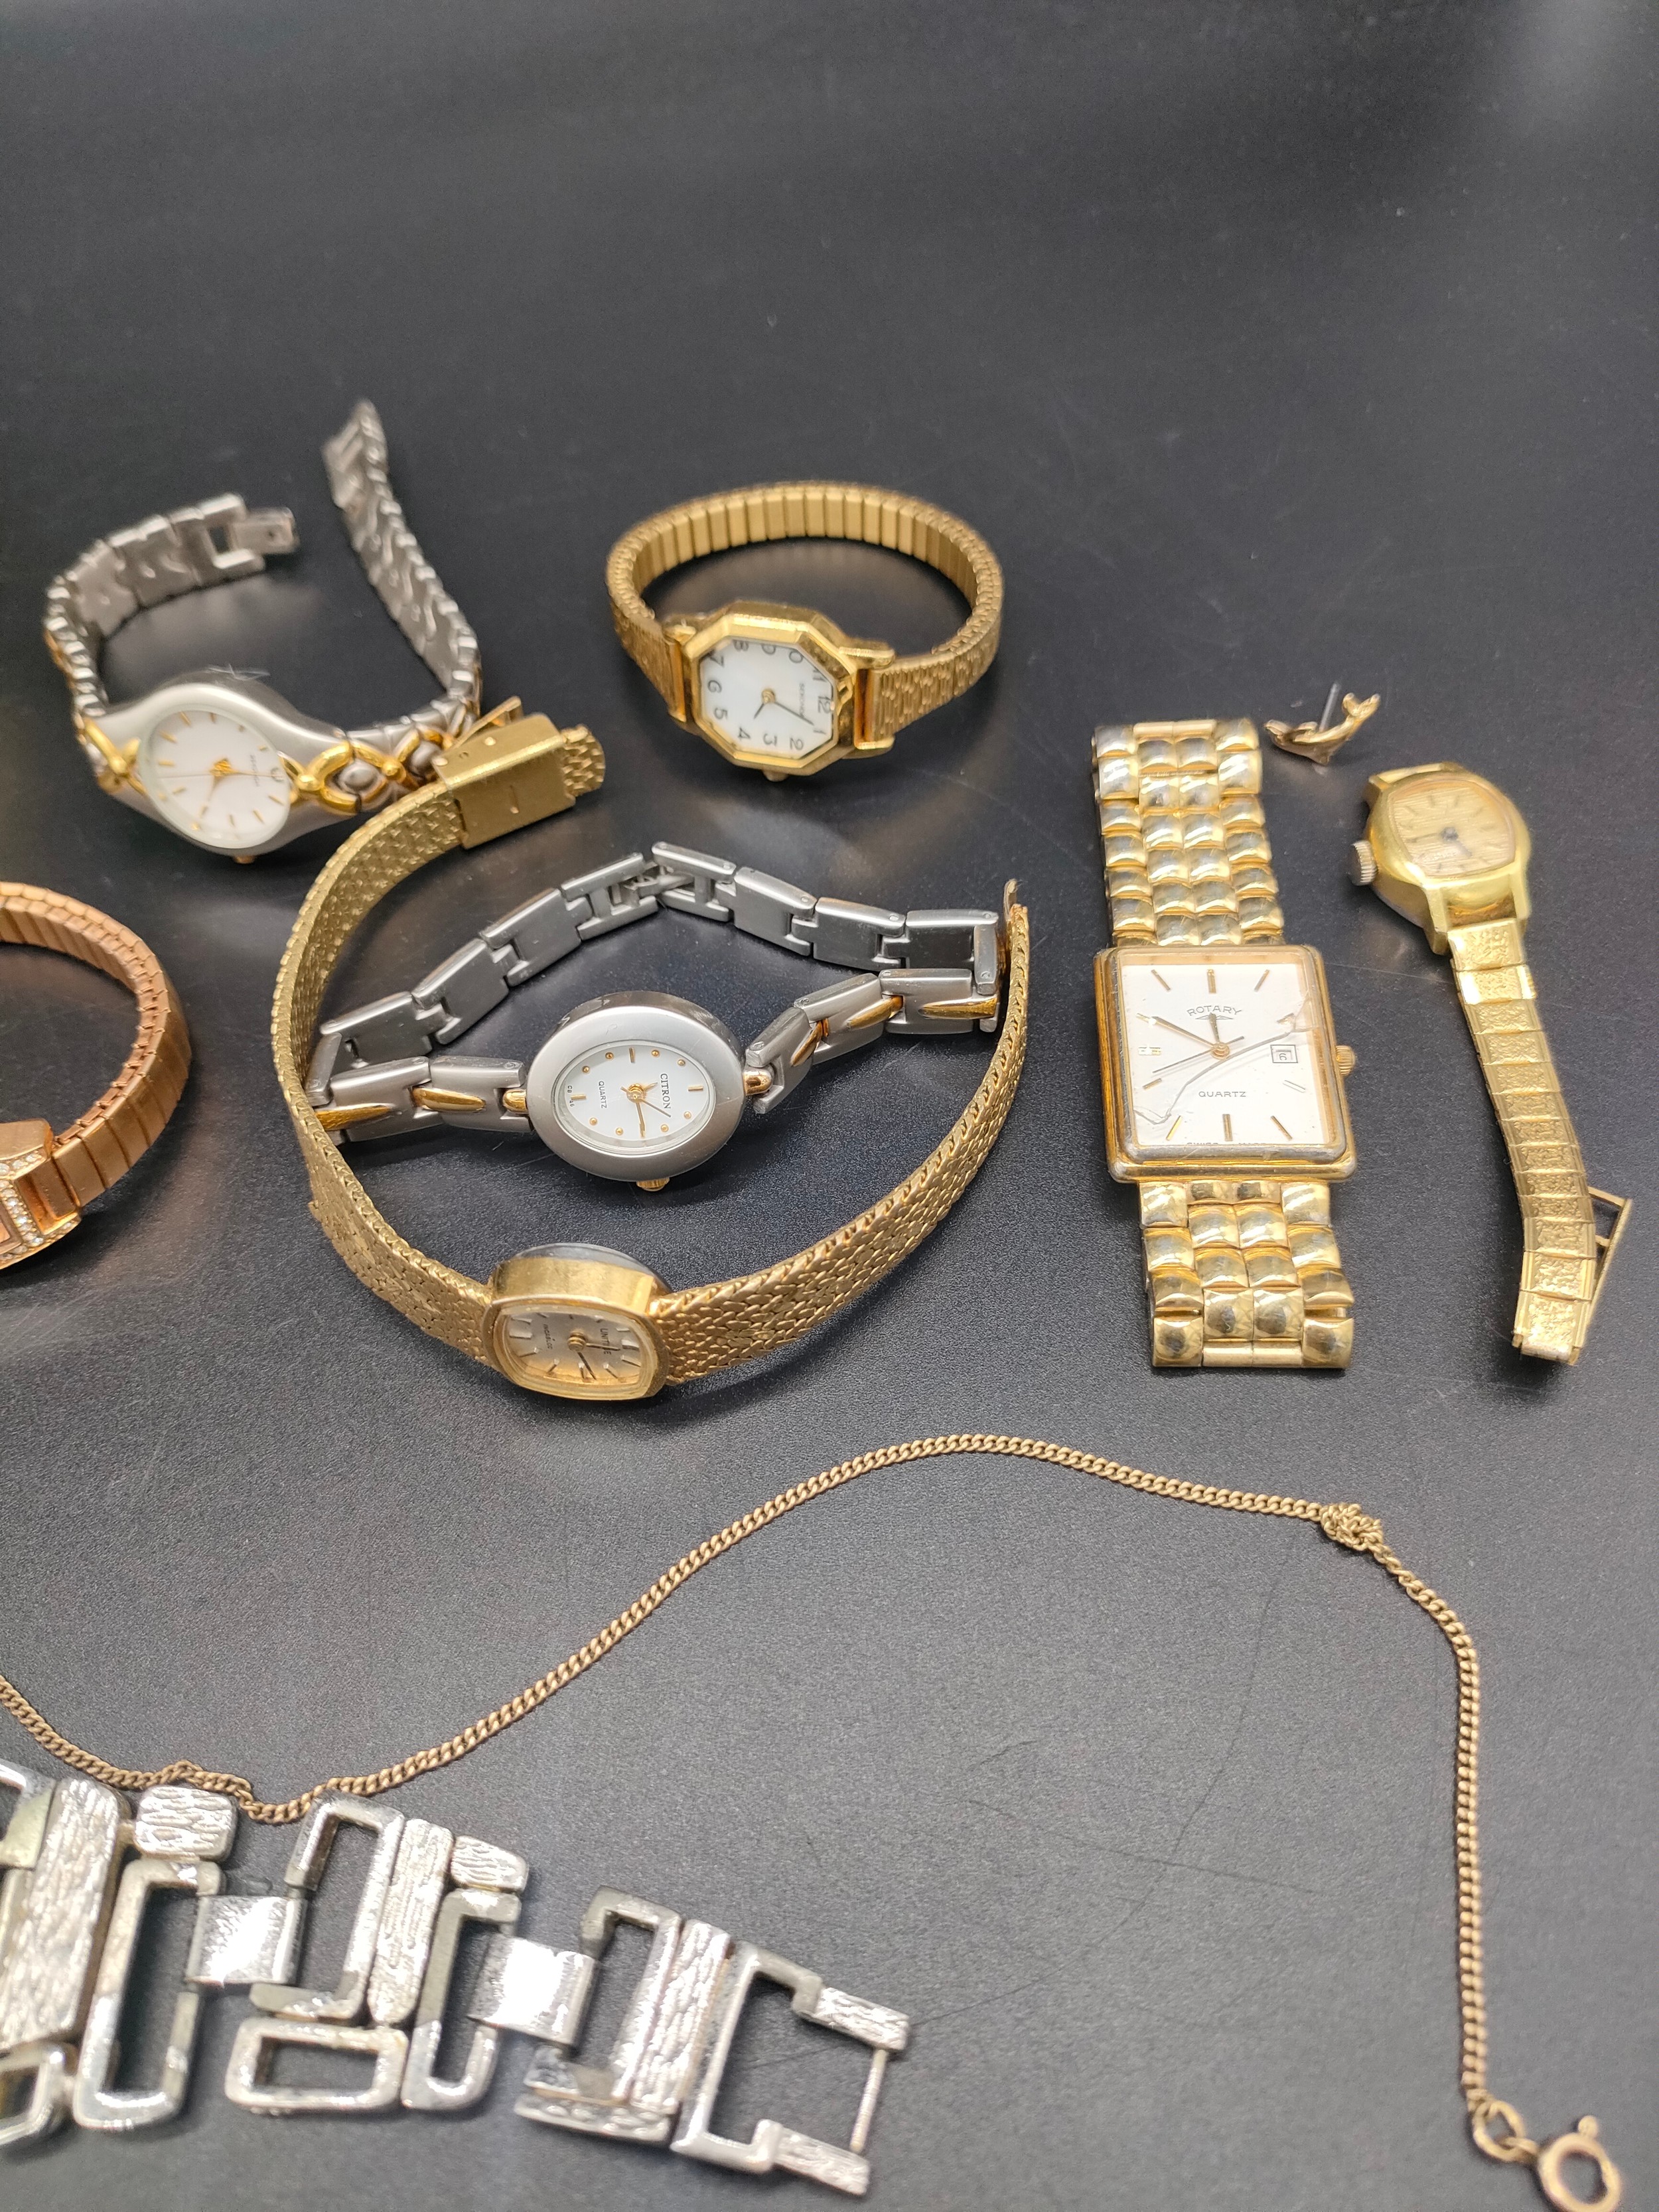 A Selection of vintage ladies watches to include gold plated Rotary Quartz and various Lorus watches - Image 2 of 3